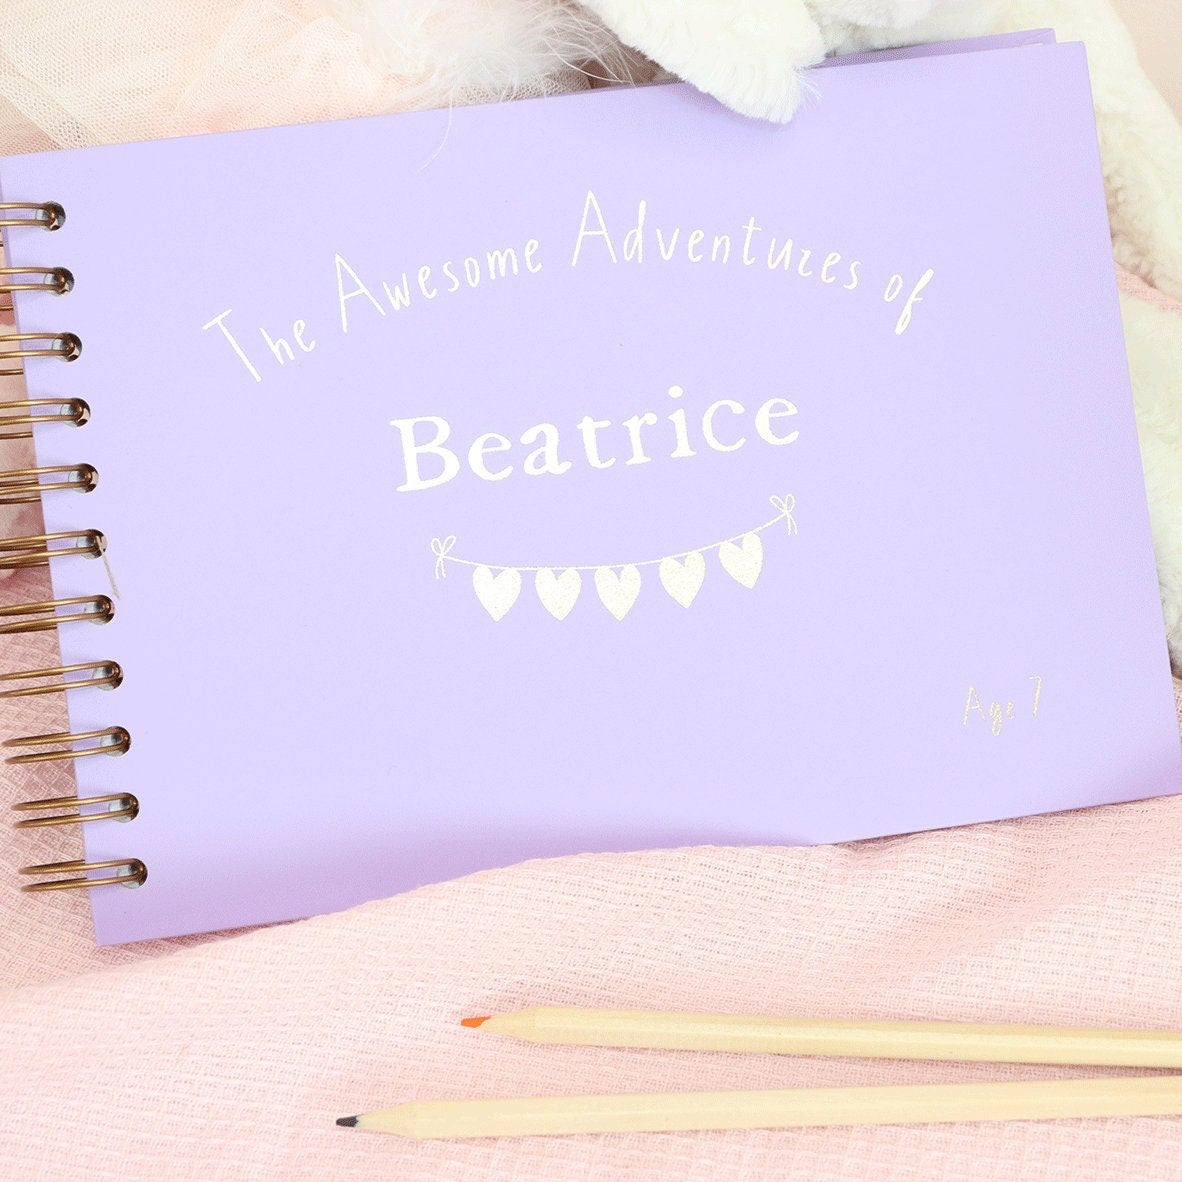 An A5 landscape lilac book in hardback that says 'The aewsime adventures of beatrice' with heart bunting below the name all in silver foil